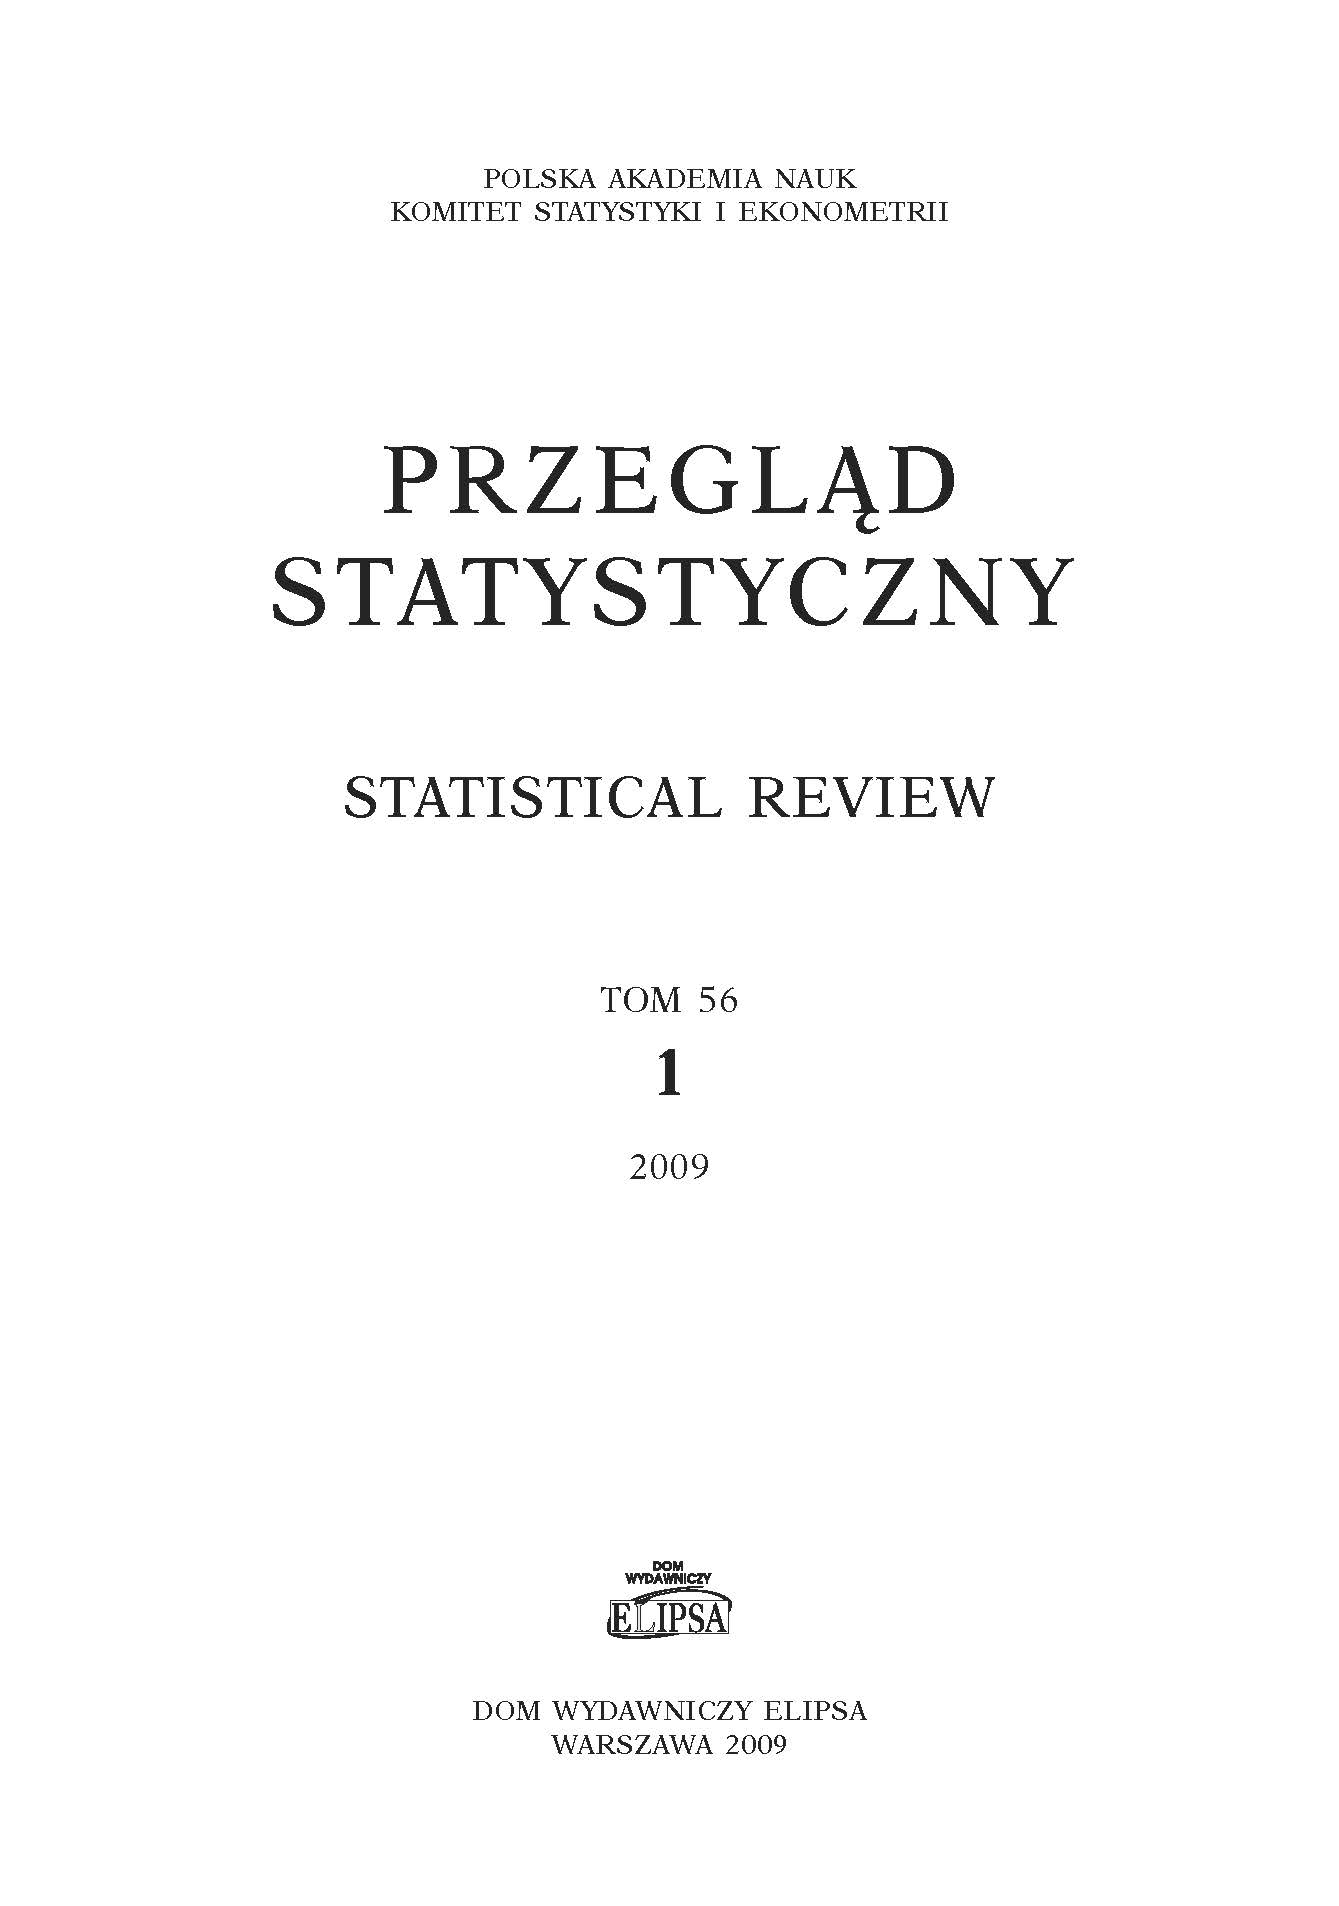 The Rational Expectations Hypothesis of the Term Structure at the Polish Interbank Market Cover Image